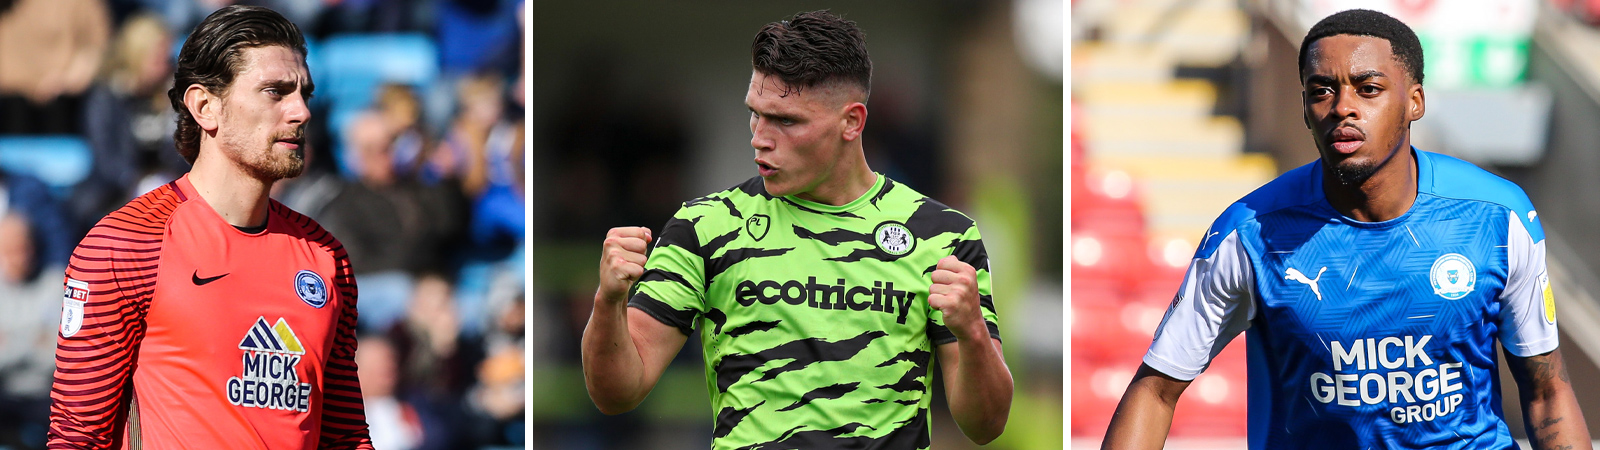 Forest Green Rovers v Posh